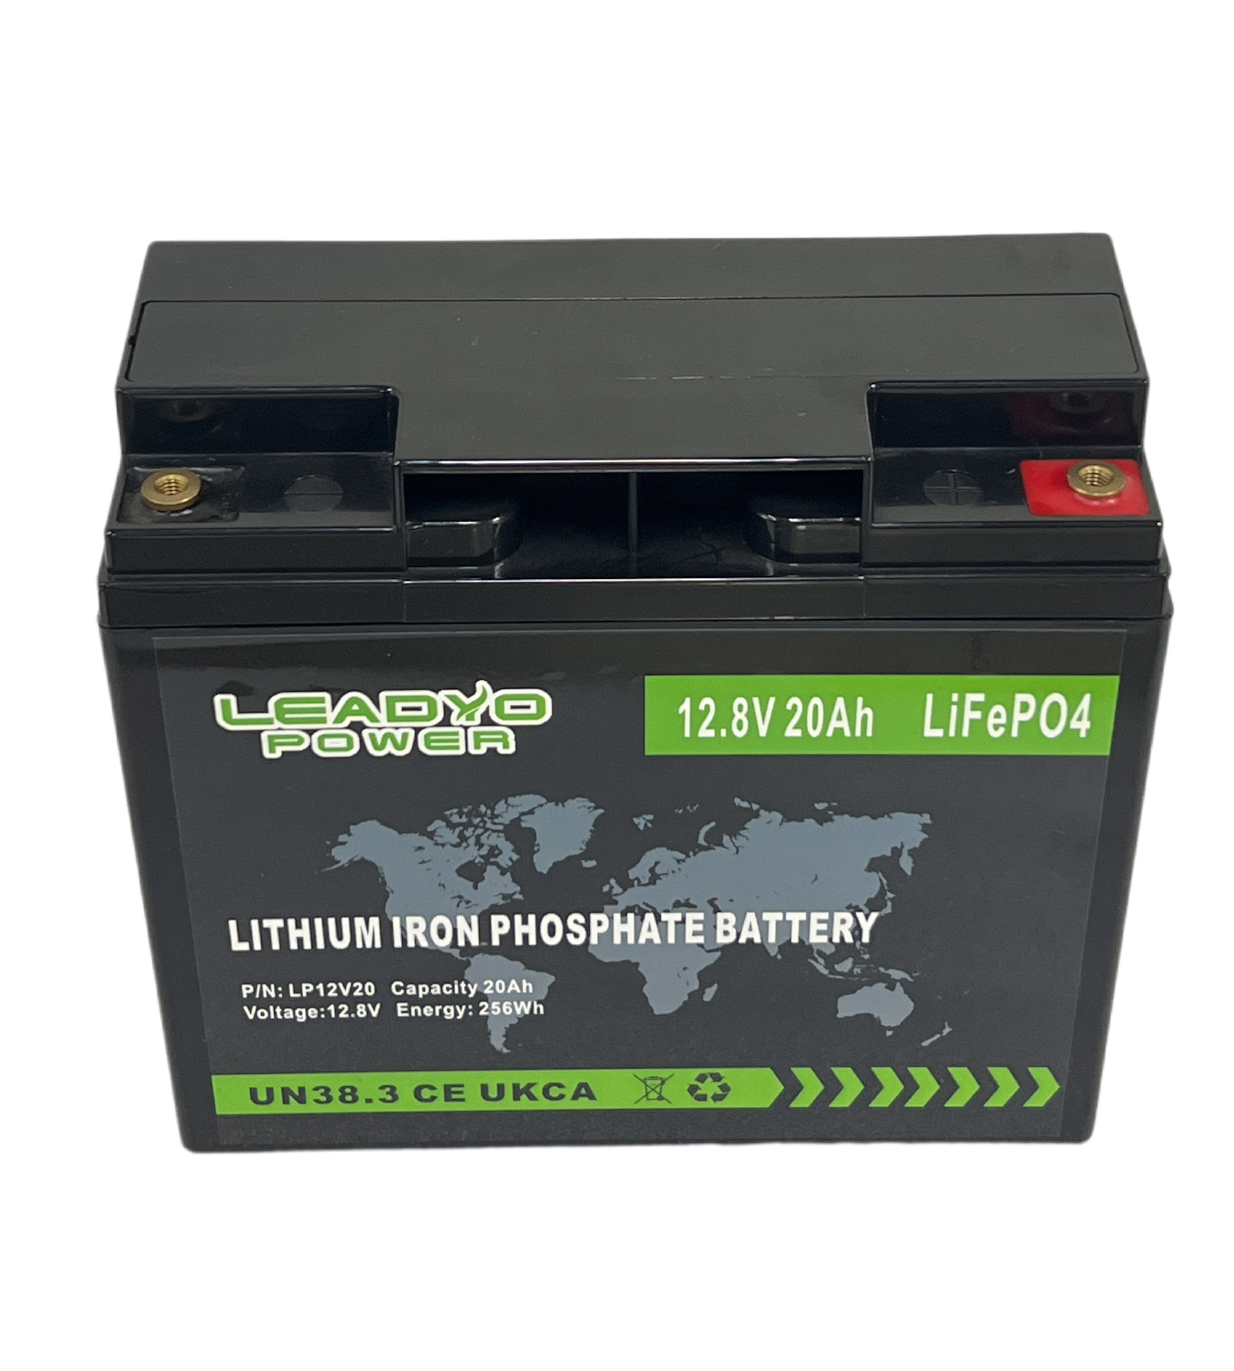 Leadyo Power: Your Source for Reliable LiFePO4 Battery Packs